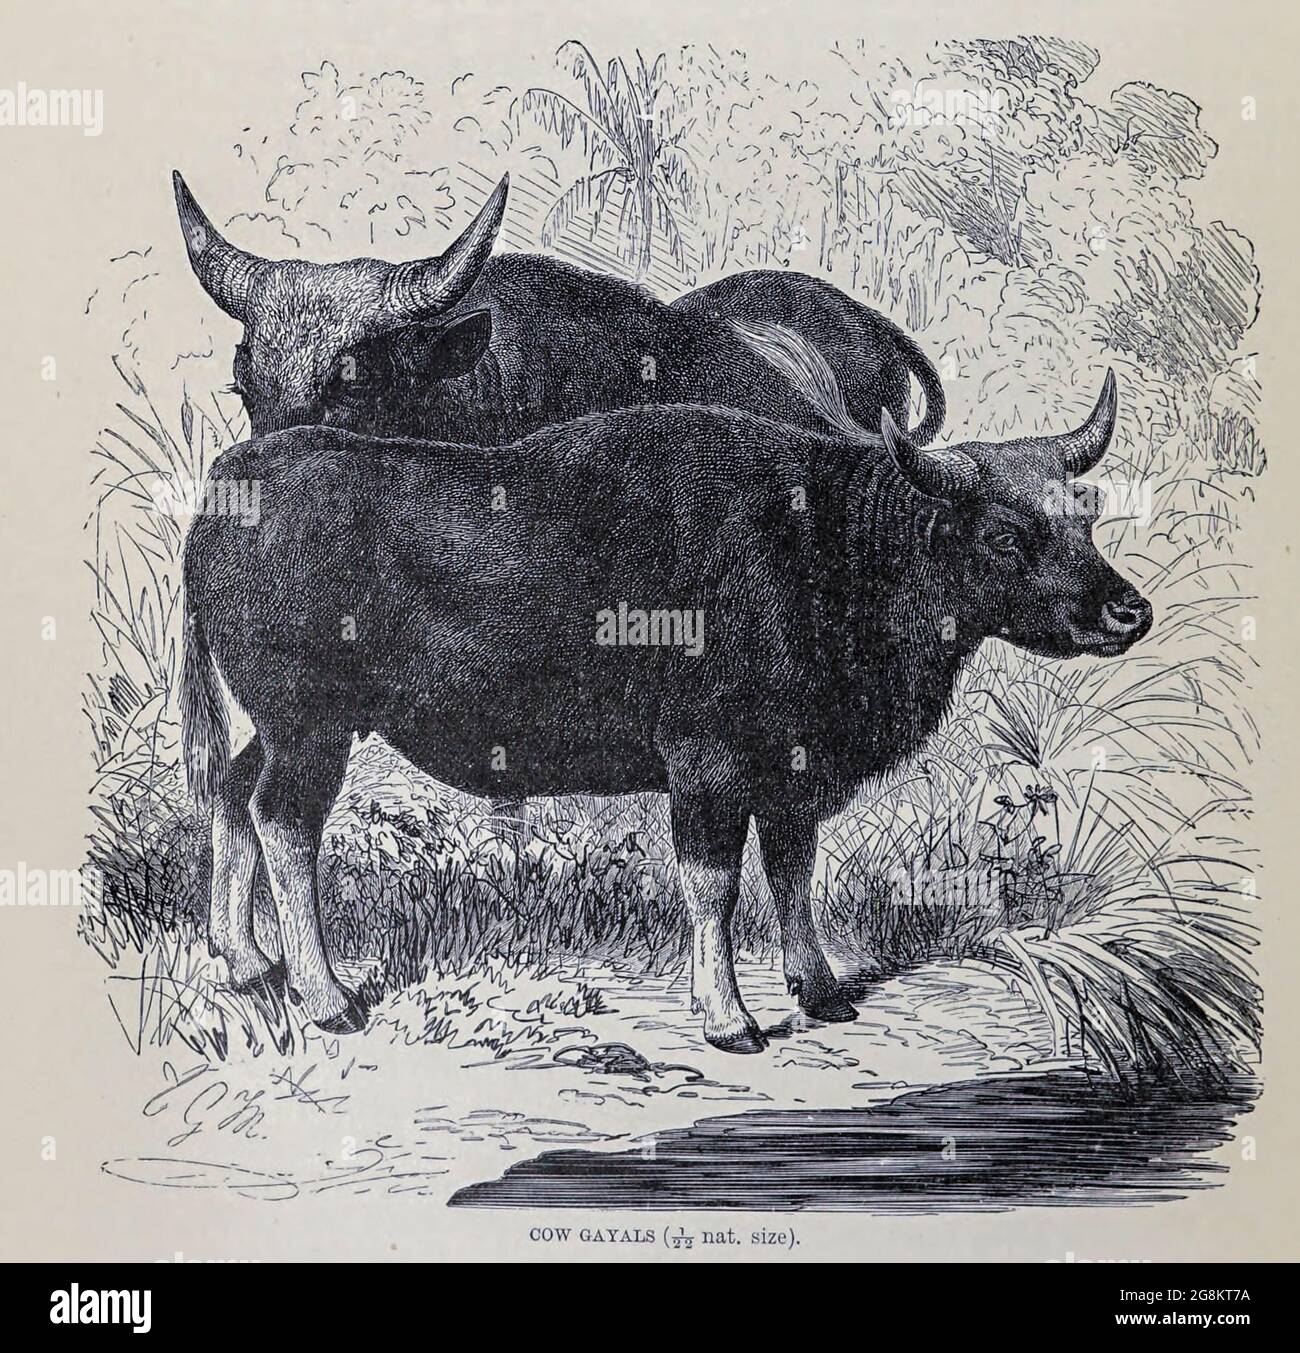 The gayal (Bos frontalis), also known as mithun, is a large domestic cattle  distributed in Northeast India, Bangladesh, Myanmar and in Yunnan, China  From the book ' Royal Natural History ' Volume